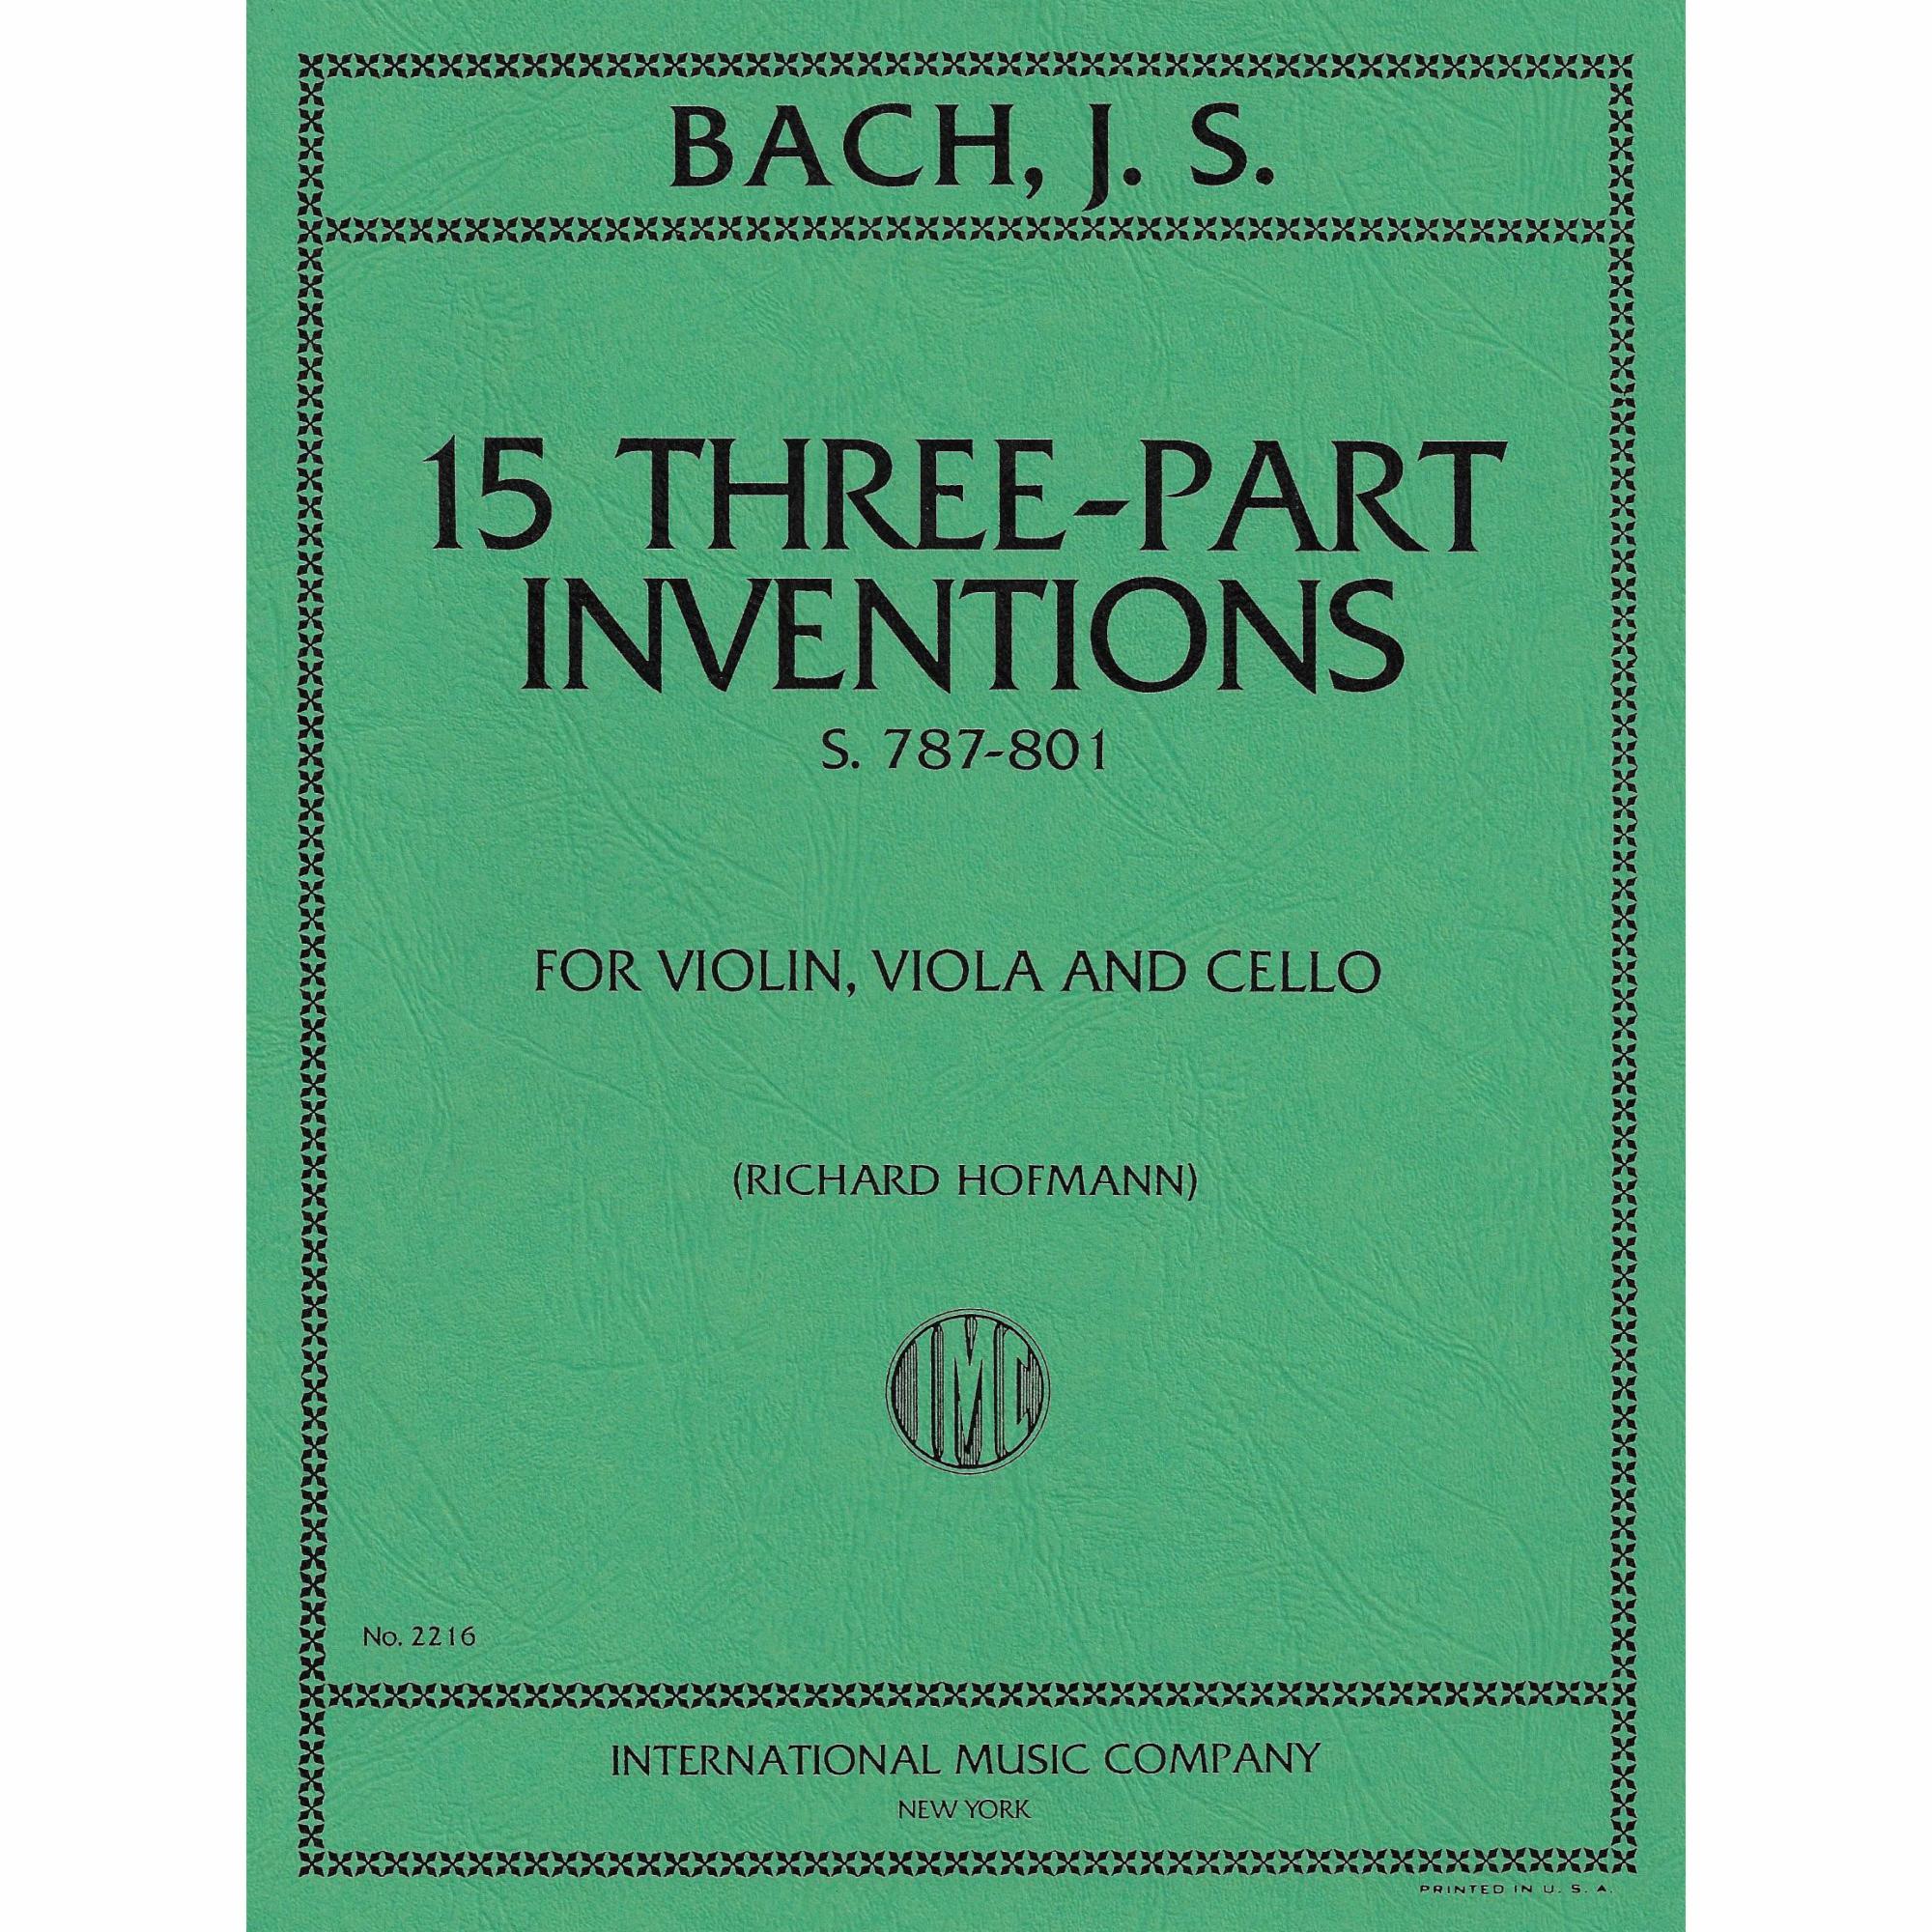 Bach -- 15 Three-Part Inventions, S. 787-801 for Violin, Viola, and Cello